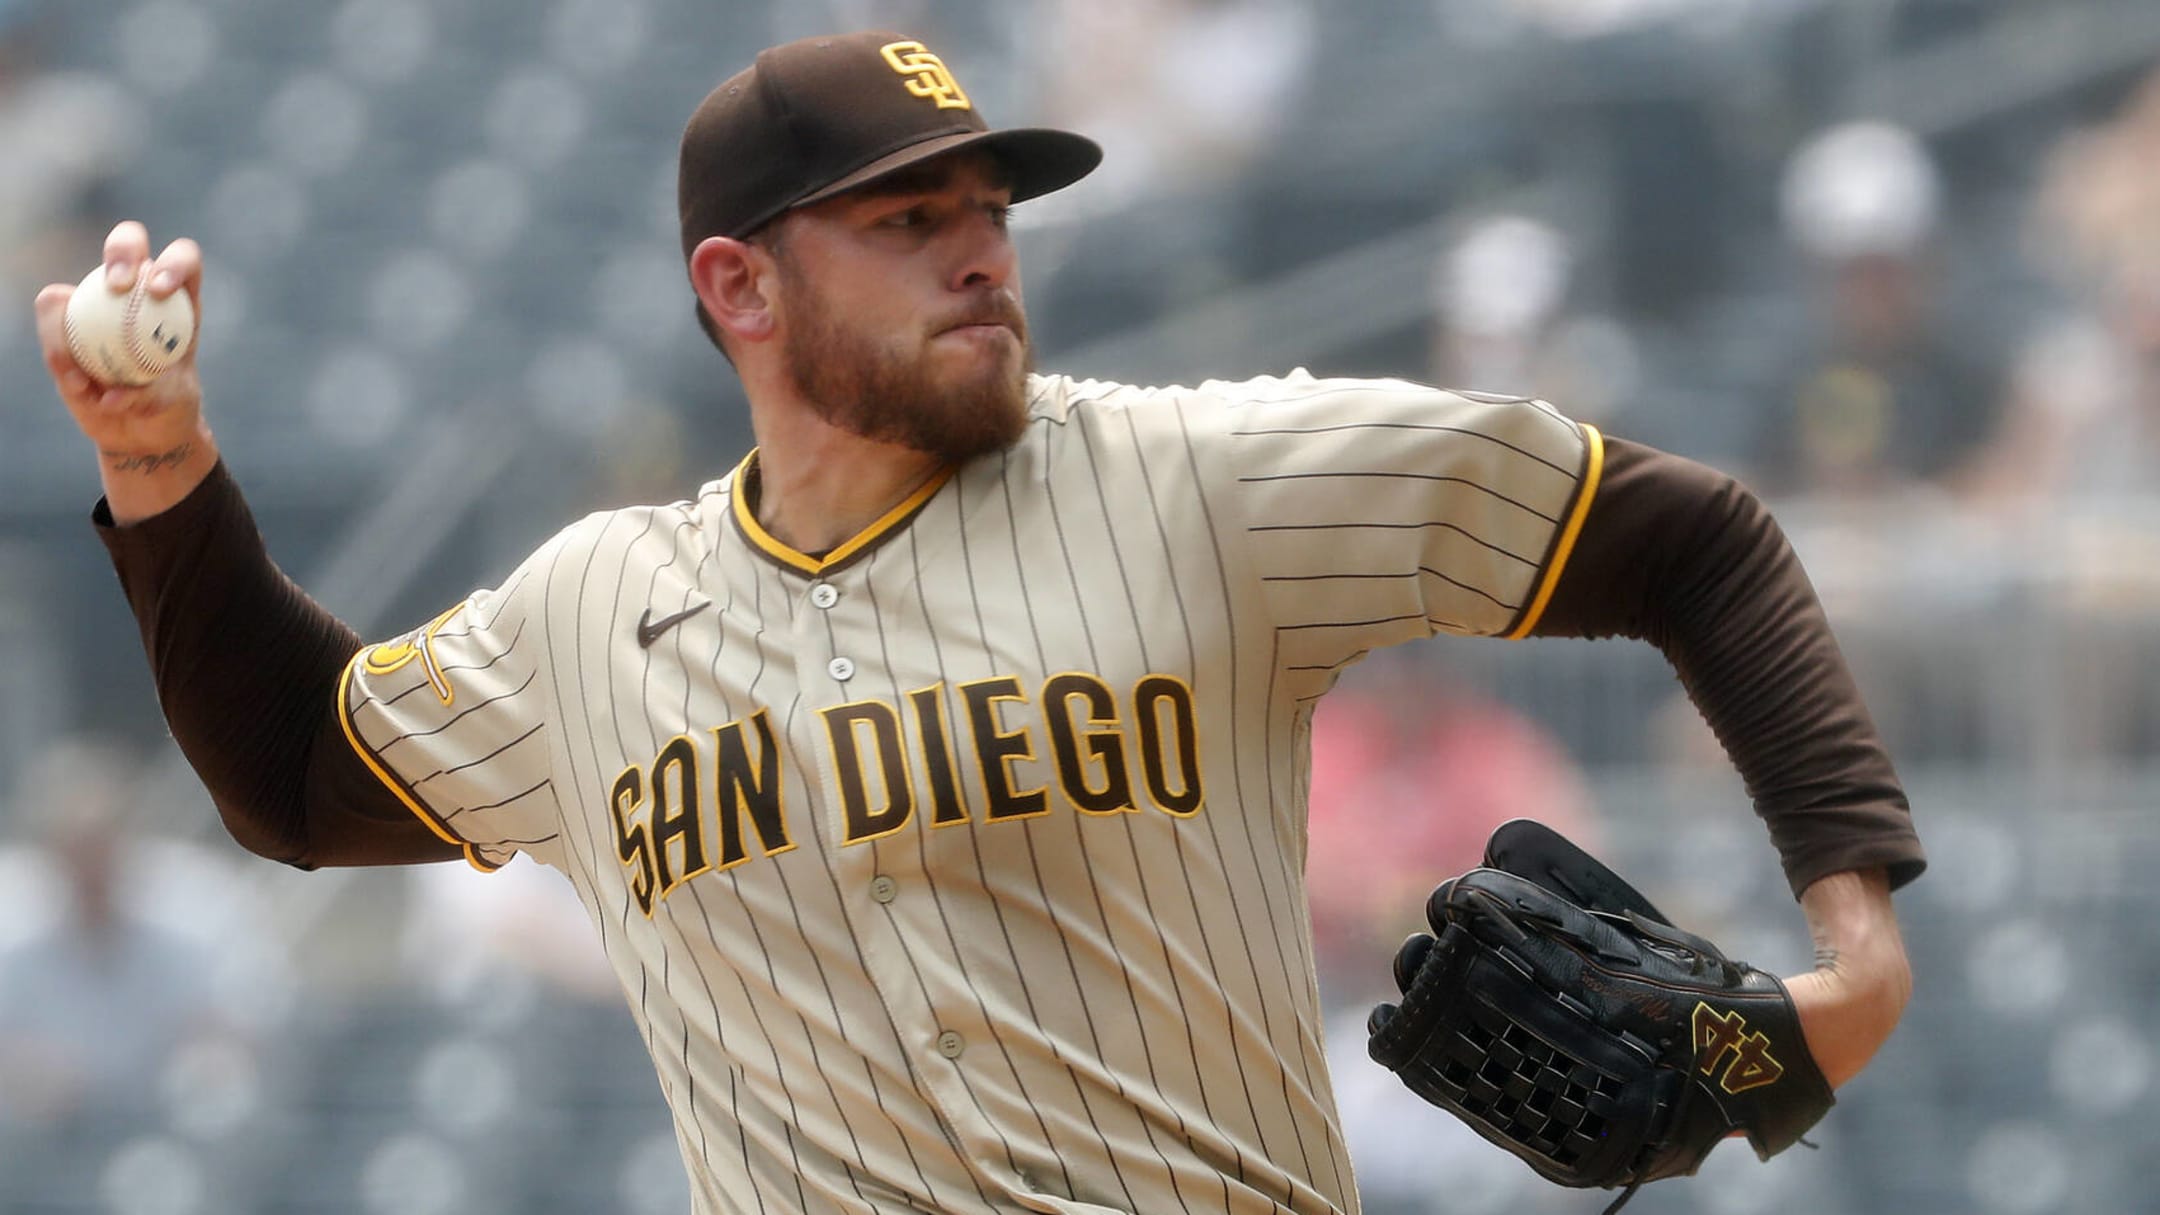 San Diego Padres: Get the Latest News on the San Diego Padres